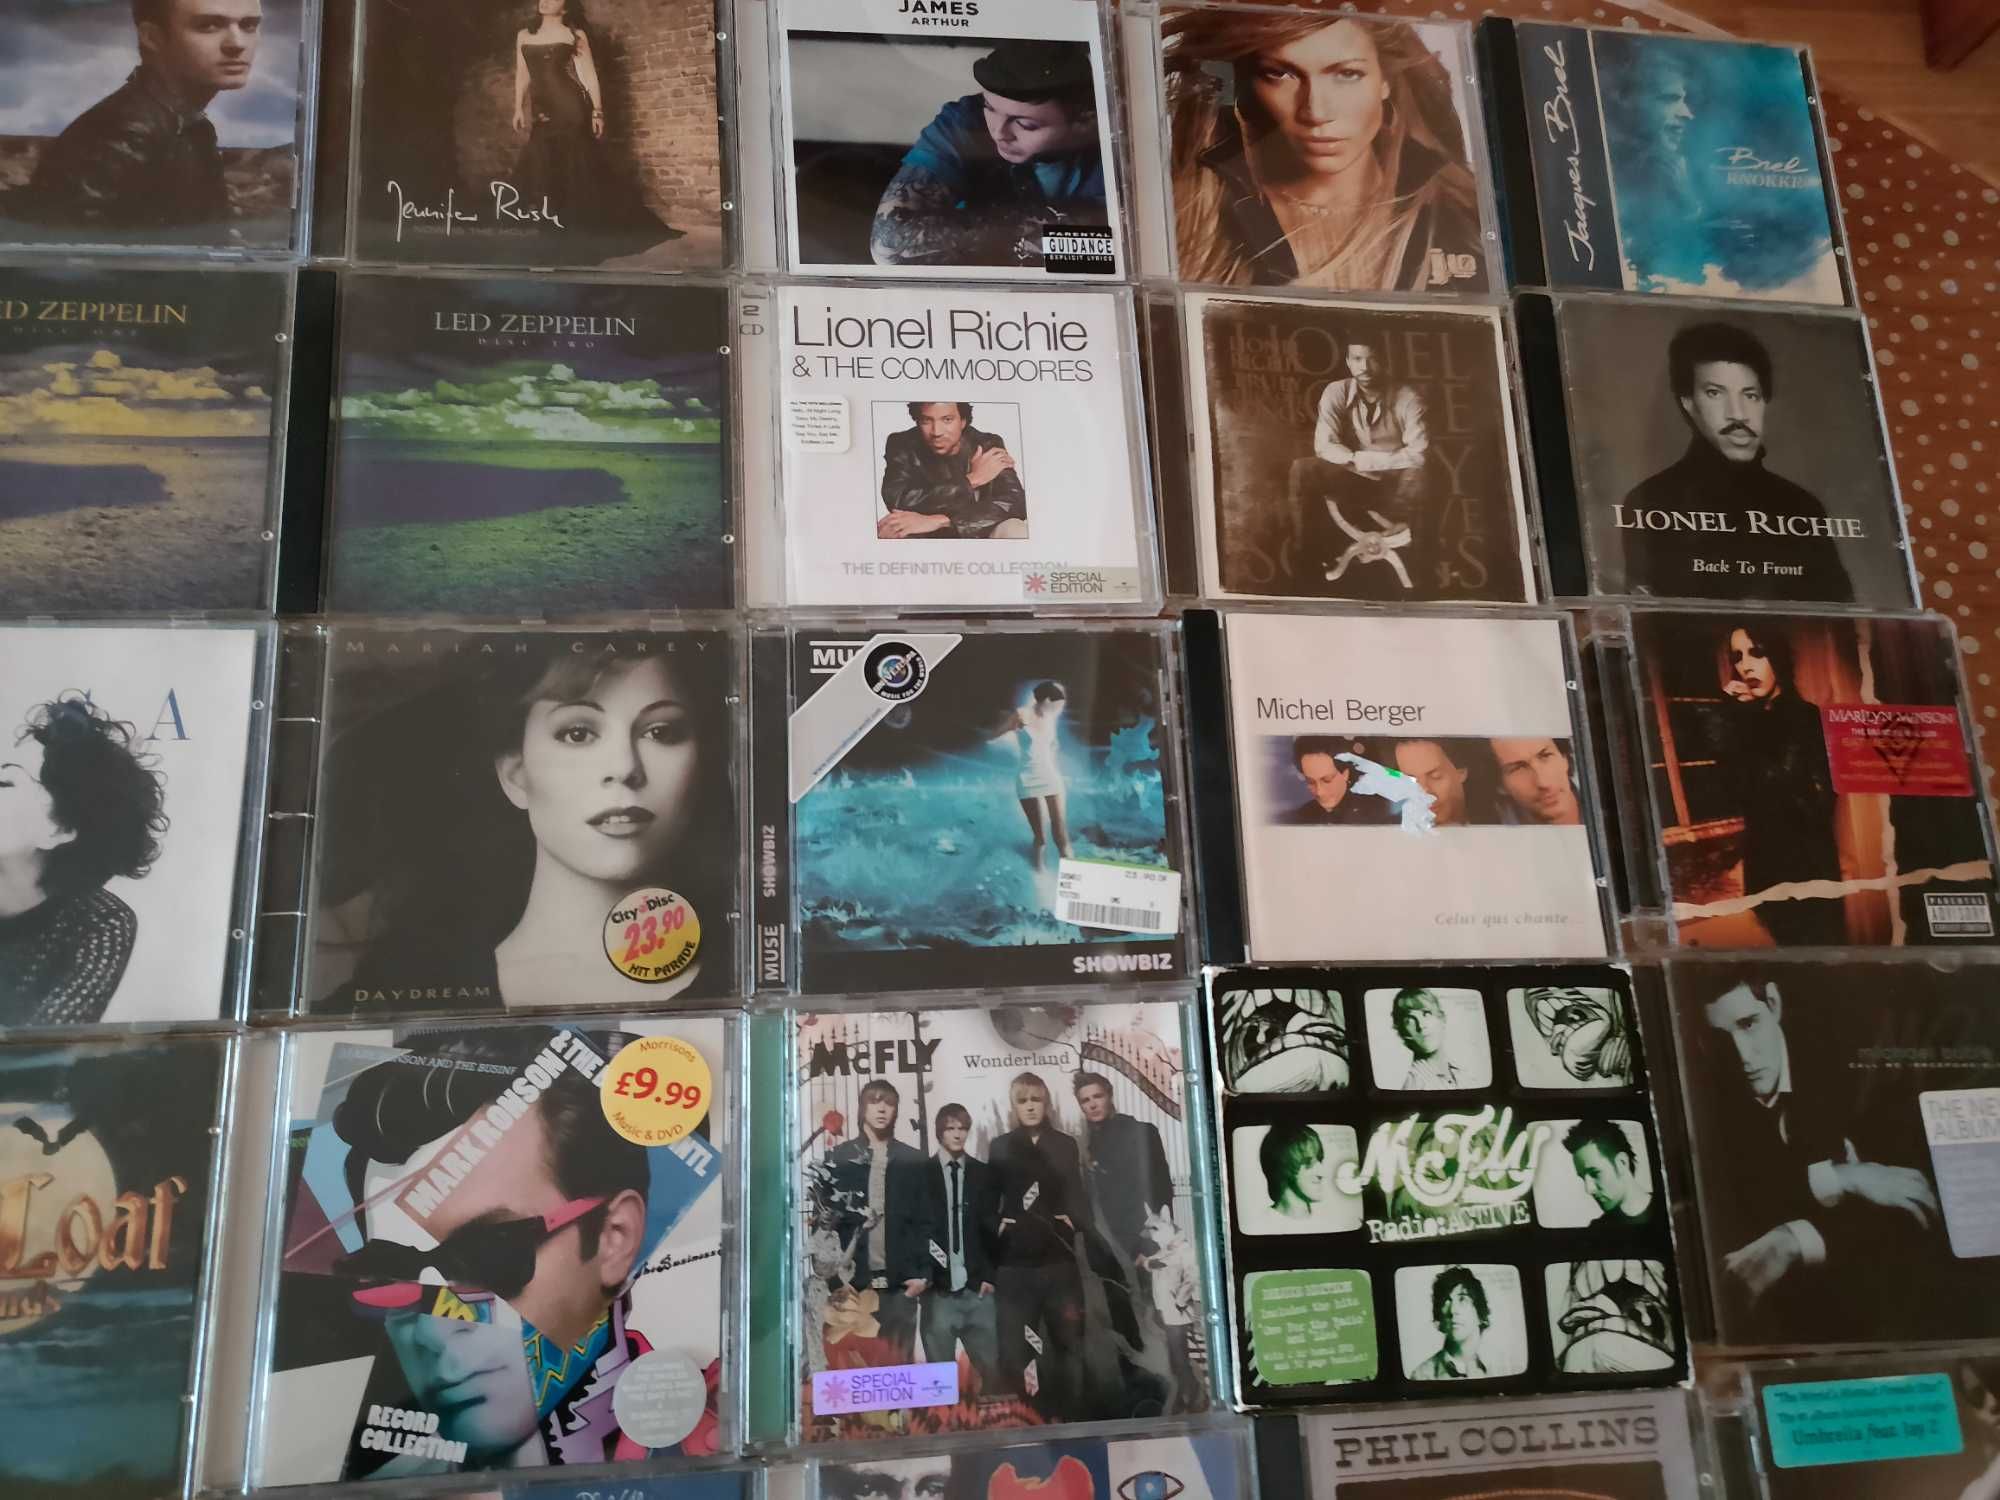 Cd-uri originale - McFly, Meat Loaf, Phil Collins, Rihanna, Simply Red